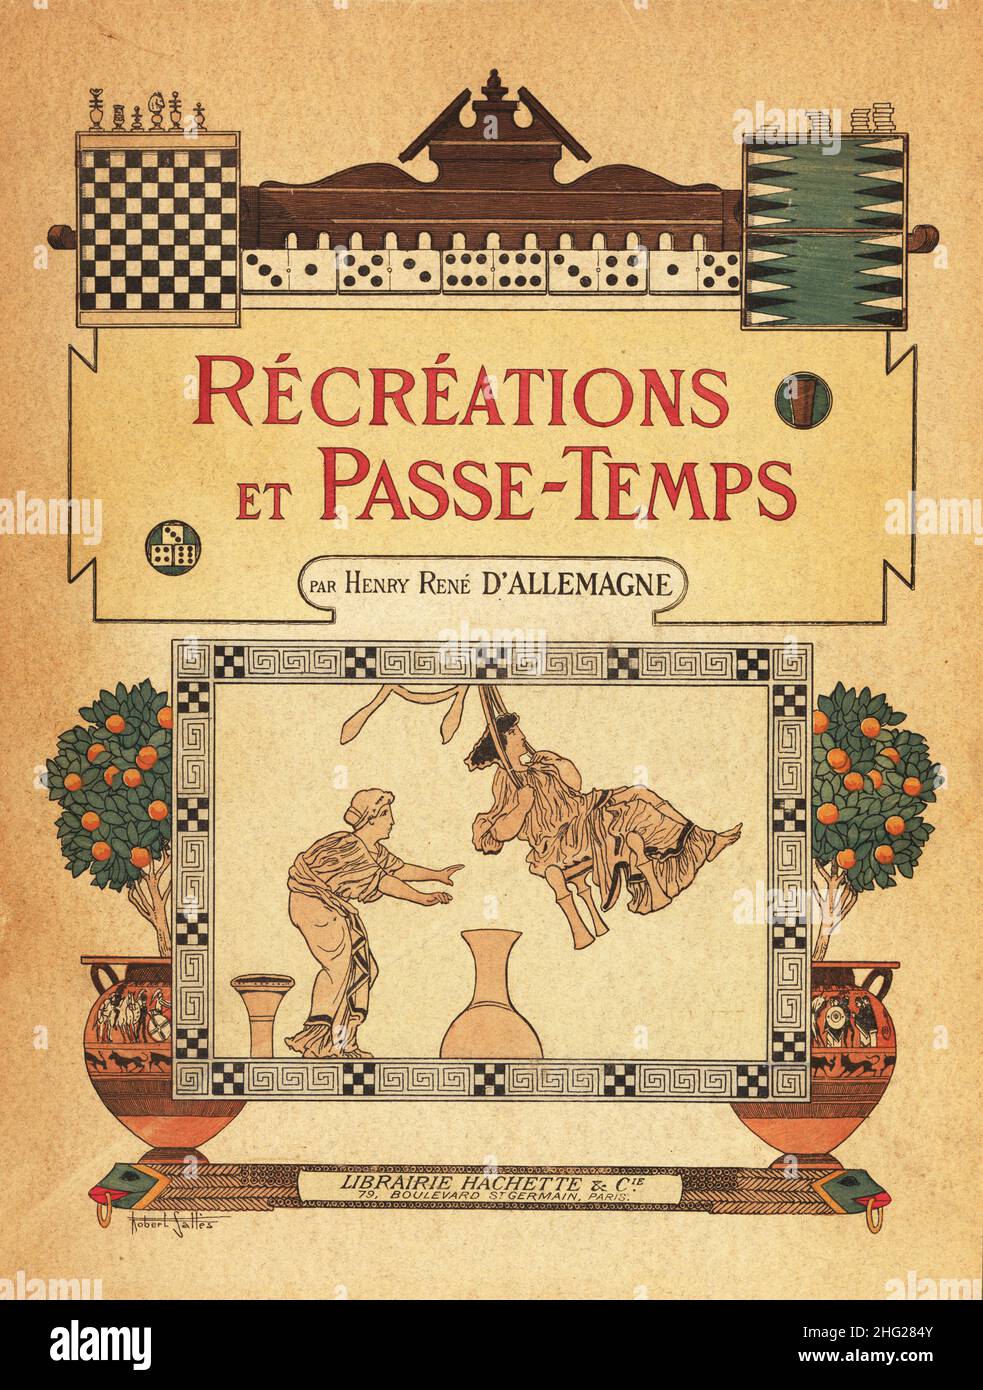 Collage of games, dominos, classical vases and illustration. Front cover designed by art nouveau painter Robert Salles. Handcoloured lithograph from Henry Rene d’Allemagne’s Recreations et Passe-Temps, Games and Pastimes, Hachette, Paris, 1906. Stock Photo